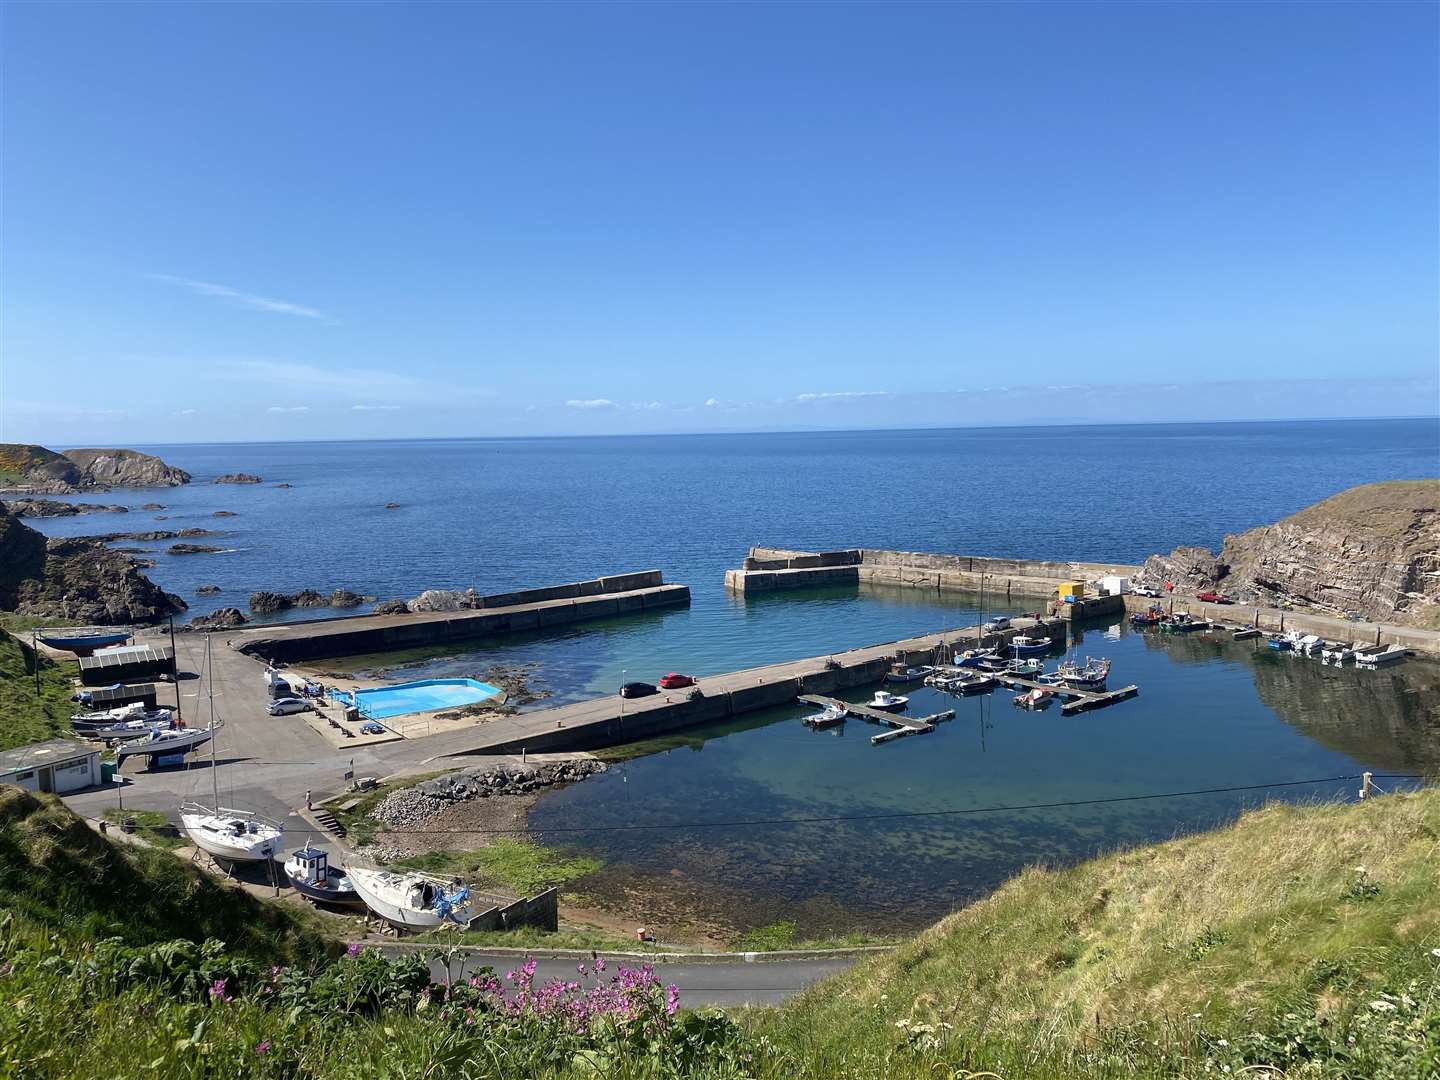 Emergency teams rushed to Portknockie Harbour after a paddleboarder suffered a dislocated knee.